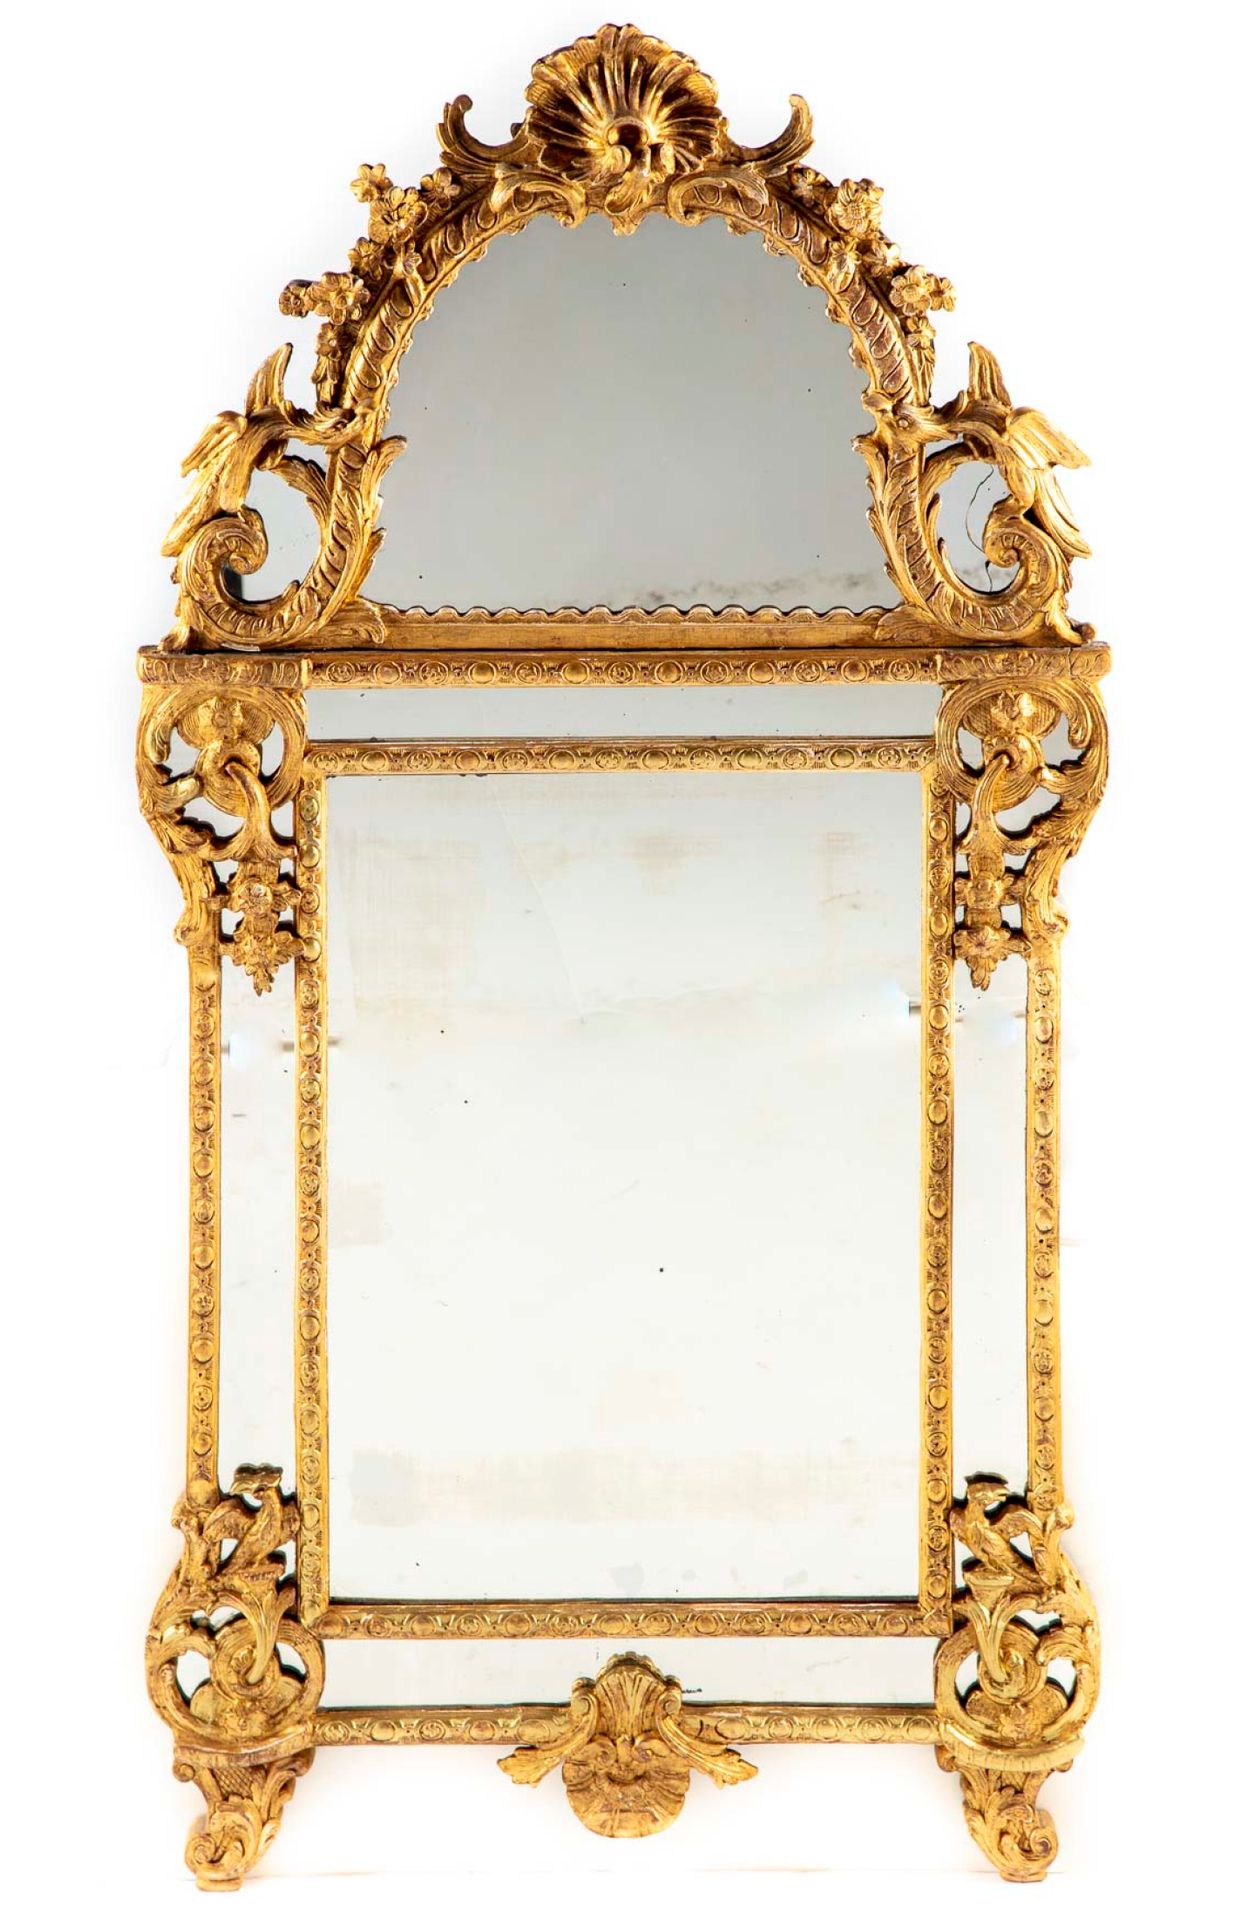 Null Gilded wood mirror decorated with foliage, shells, flowers and birds

Louis&hellip;